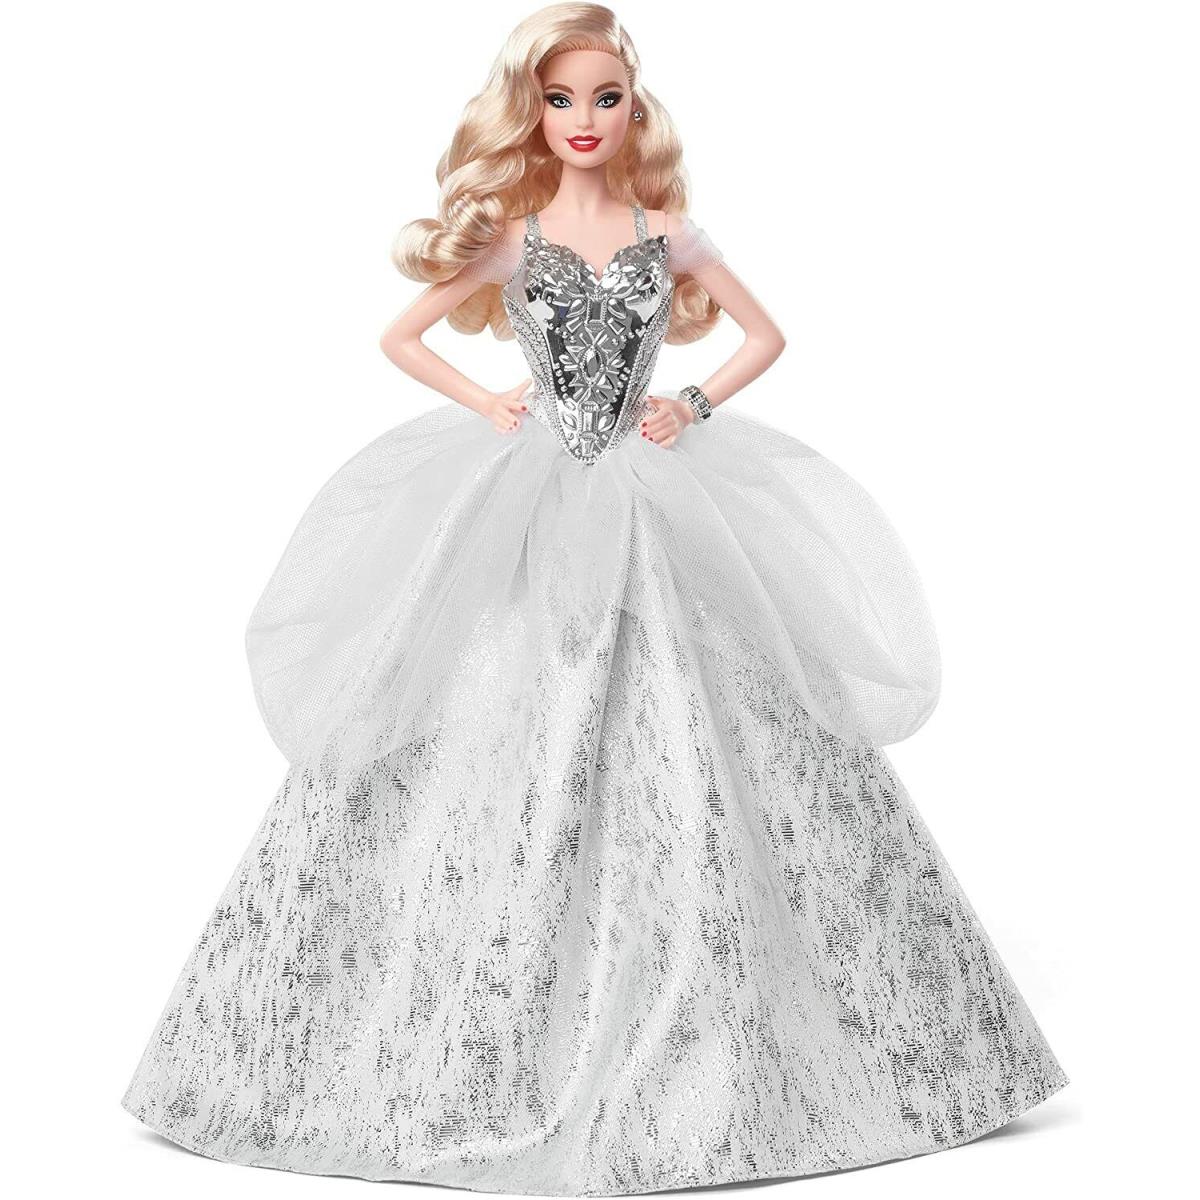 Barbie Signature 2021 Collector Collection Holiday Blonde Wavy Hair Silver Gown